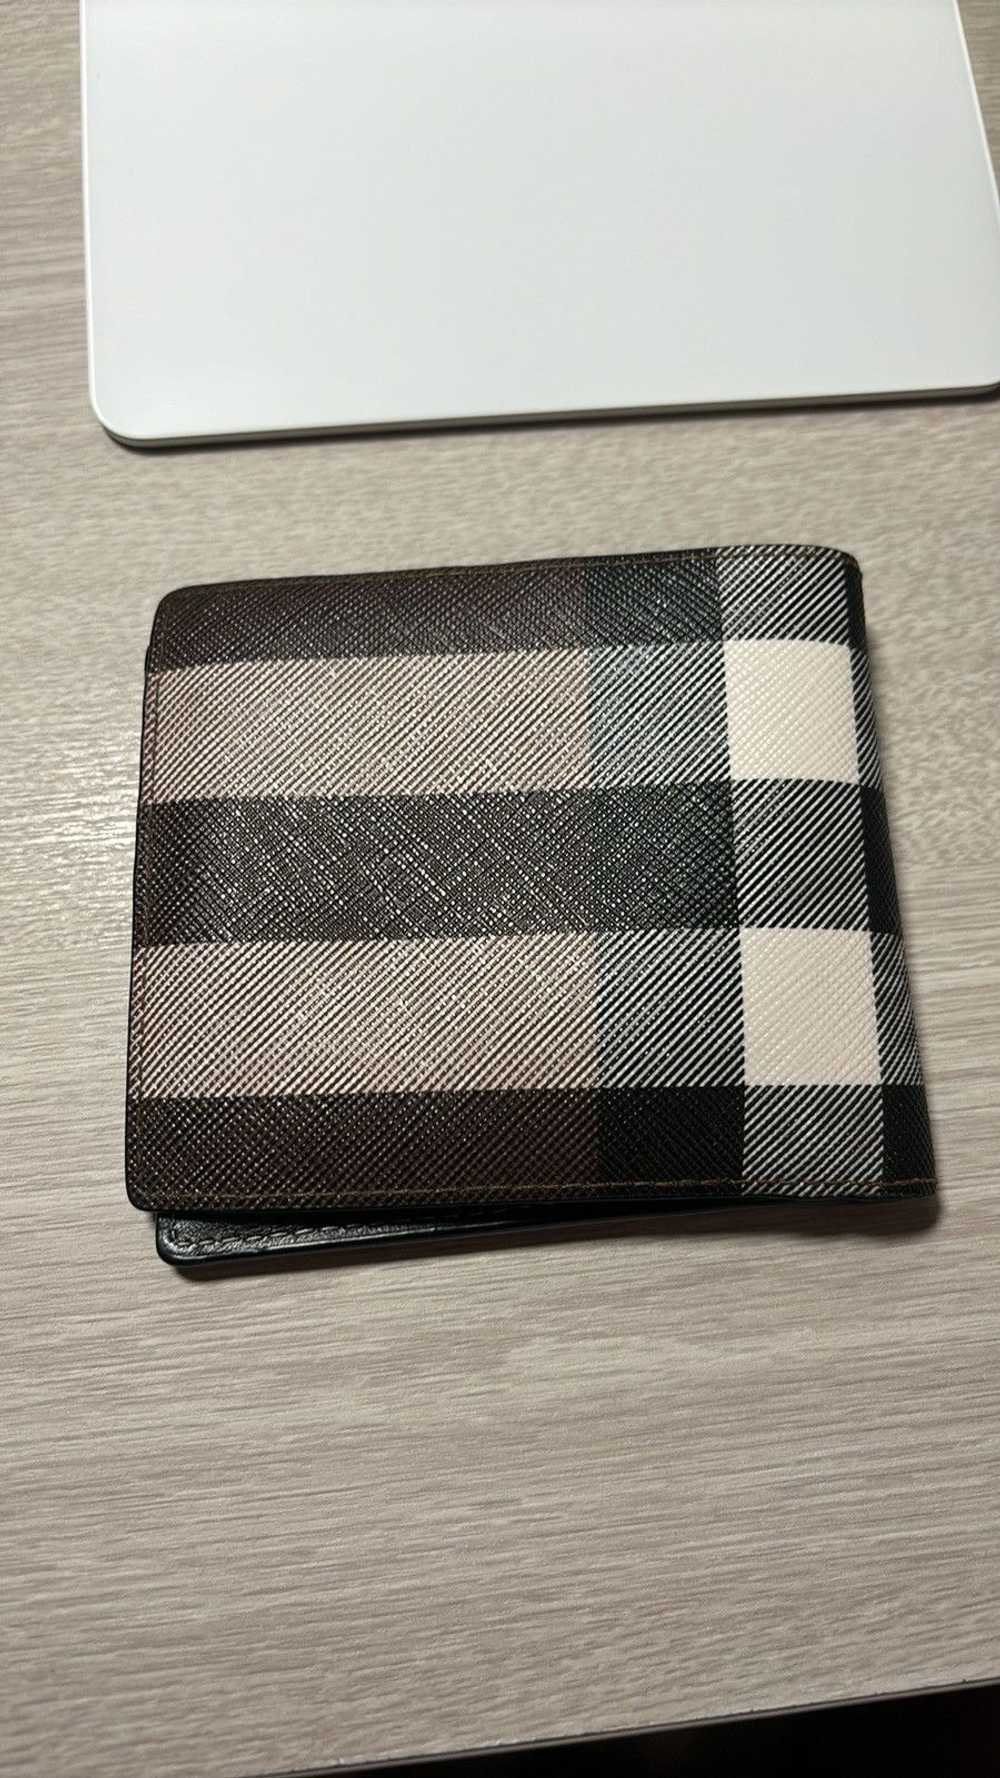 Burberry Check Leather Wallet - image 5